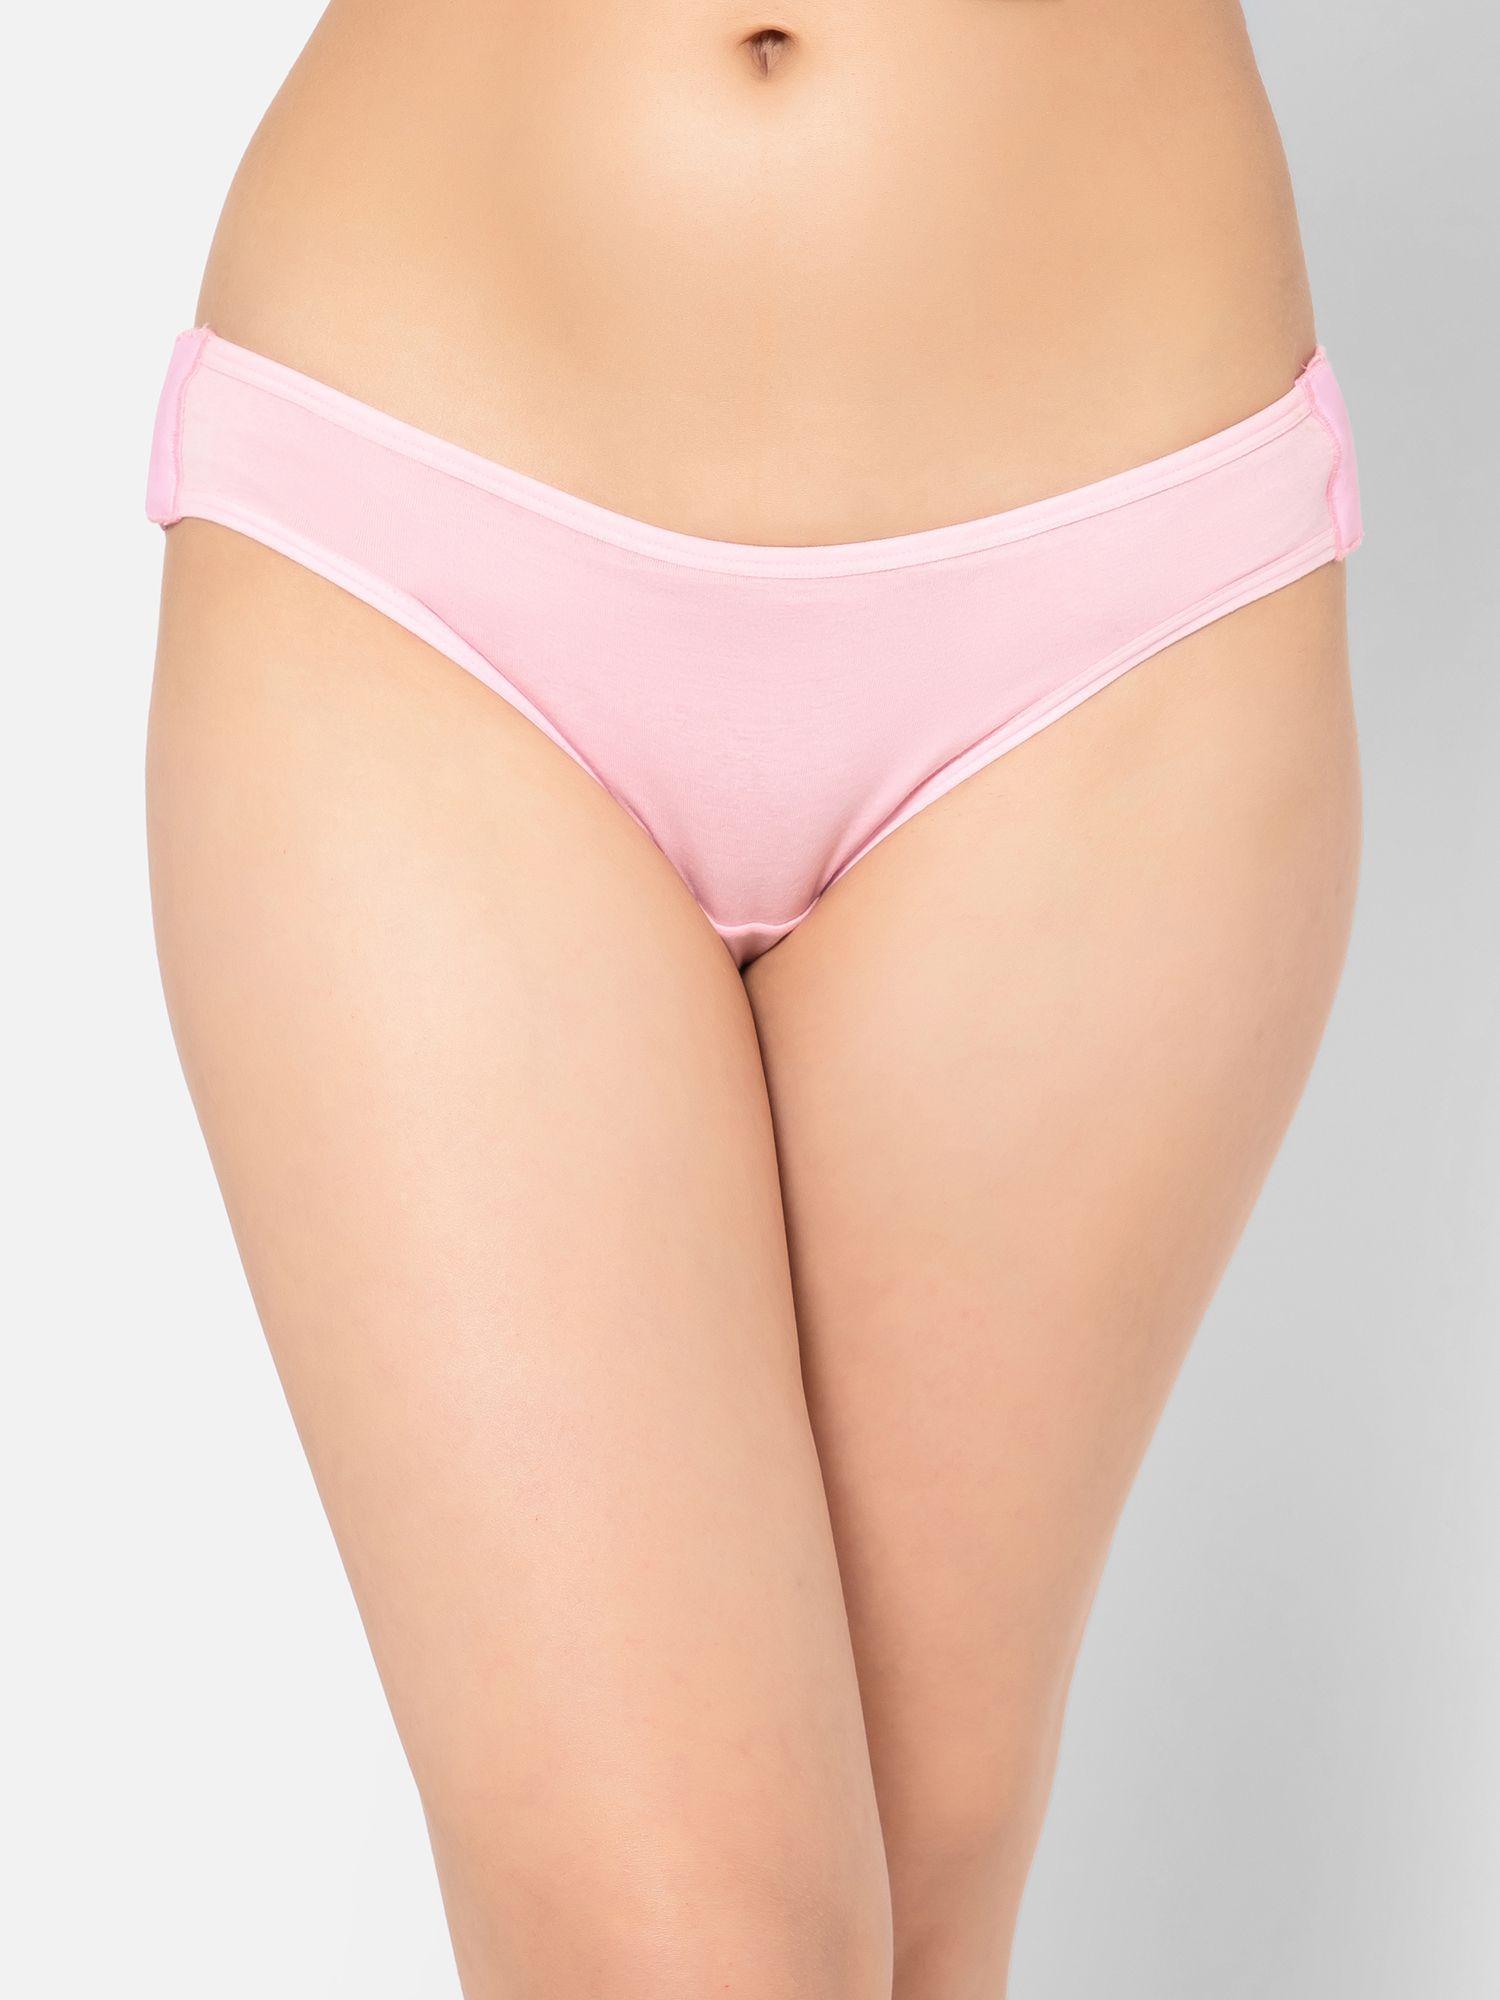 low waist leak-proof adult brief in baby pink with side hooks - cotton